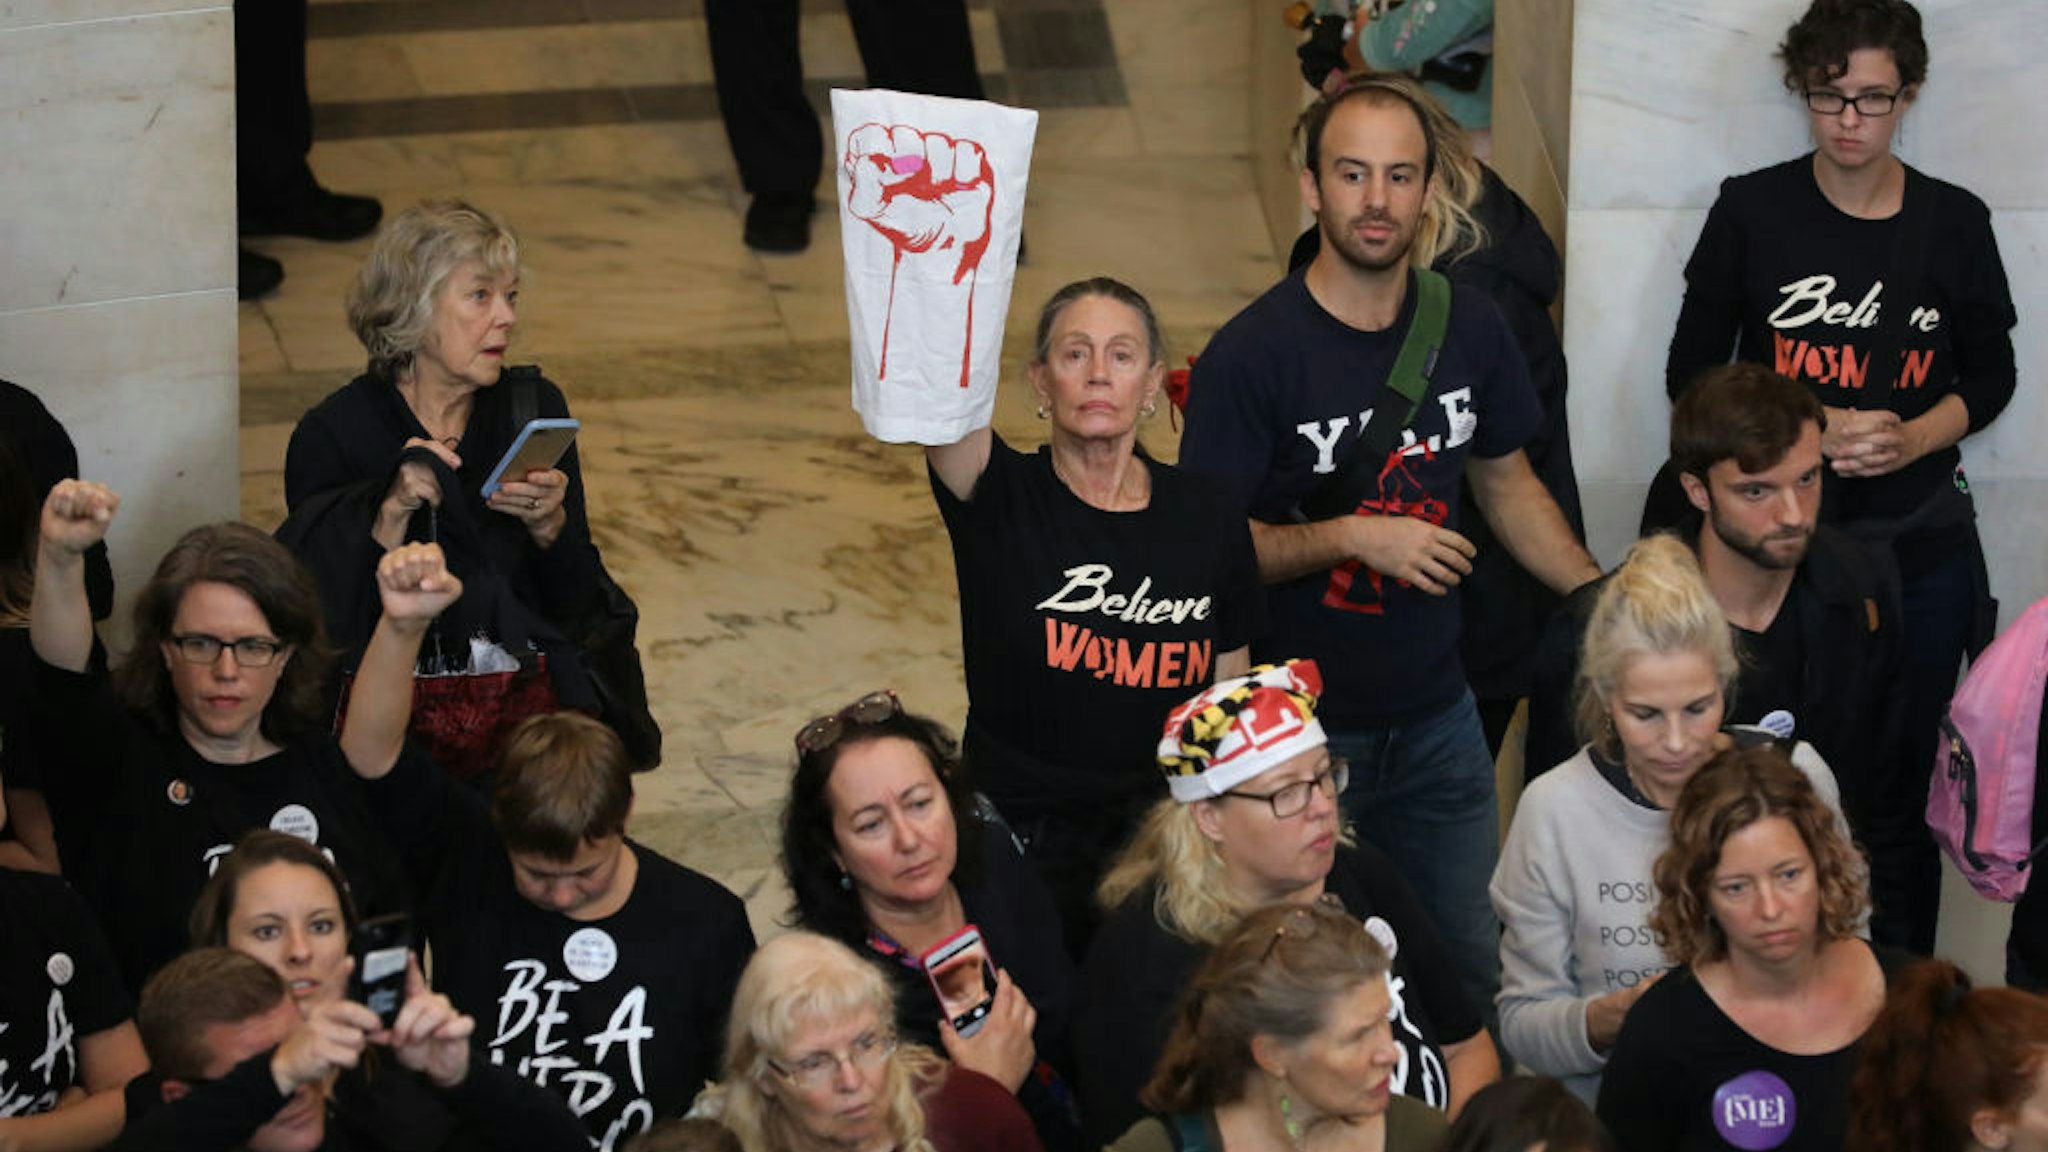 Hundreds of protesters rally in the Russell Senate Office Building Rotunda while demonstrating against the confirmation of Judge Brett Kavanaugh on Capitol Hill September 24, 2018 in Washington, DC. Hundreds of people from half a dozen progressive organizations, including students from Yale University Law School, protested on Capitol Hill for a #BelieveSurvivors Walkout against Judge Kavanaugh, who has been accused by at least two women of sexual assault. (Photo by Chip Somodevilla/Getty Images)